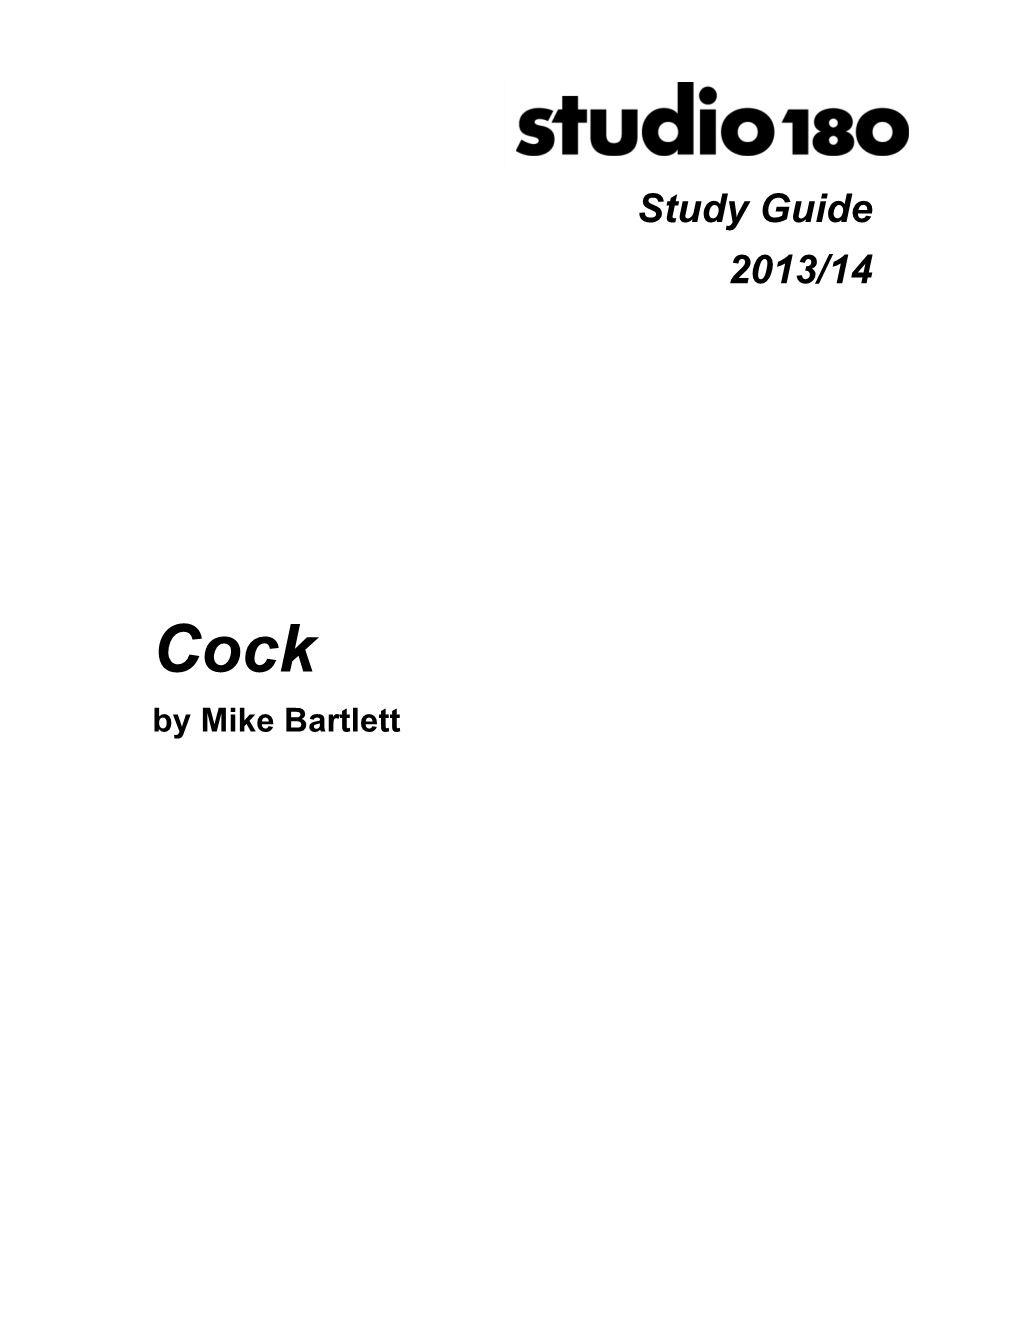 Cock Study Guide Is Copyright © 2014, Studio 180 Theatre, and May Be Reprinted, Reproduced Or Used Only with the Prior Written Permission of Studio 180 Theatre